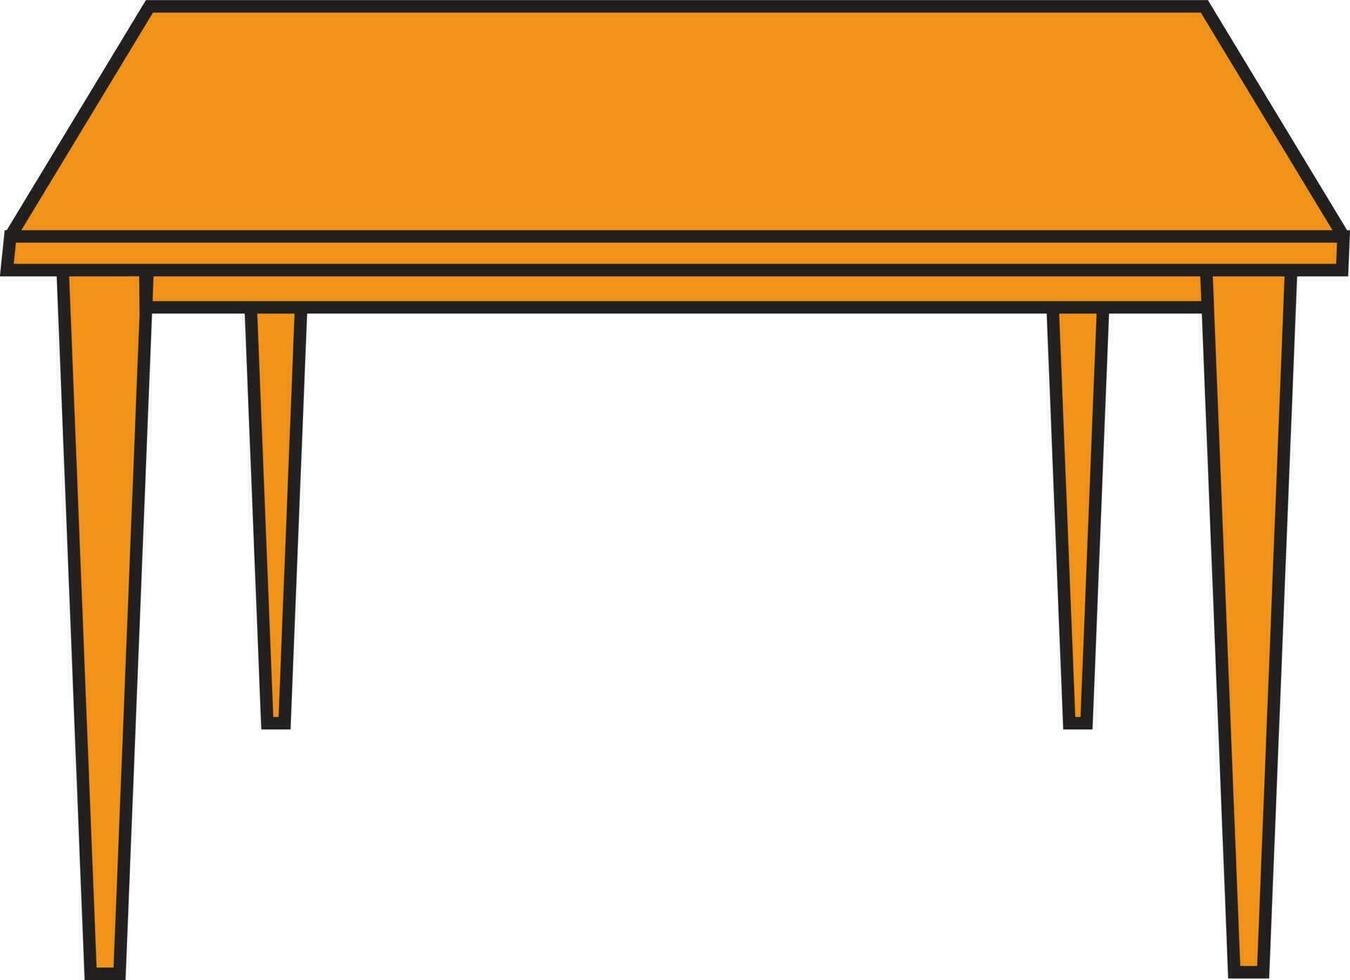 Table icon in orange color for education. vector